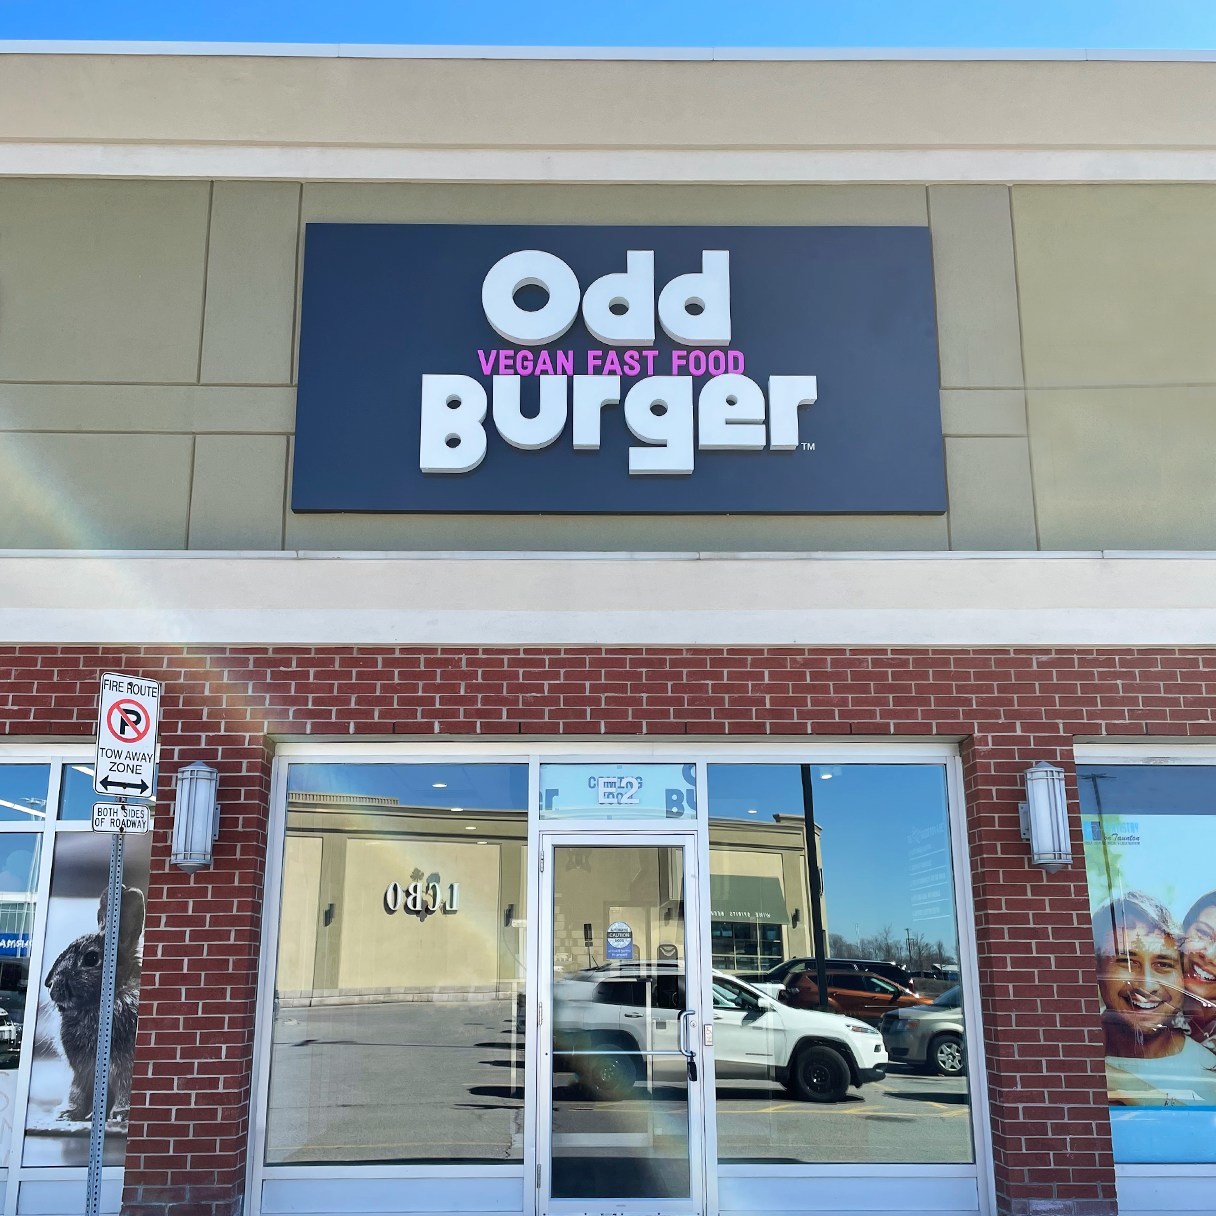 Odd Burger Corporation-Odd Burger Continues Expansion In Ontario